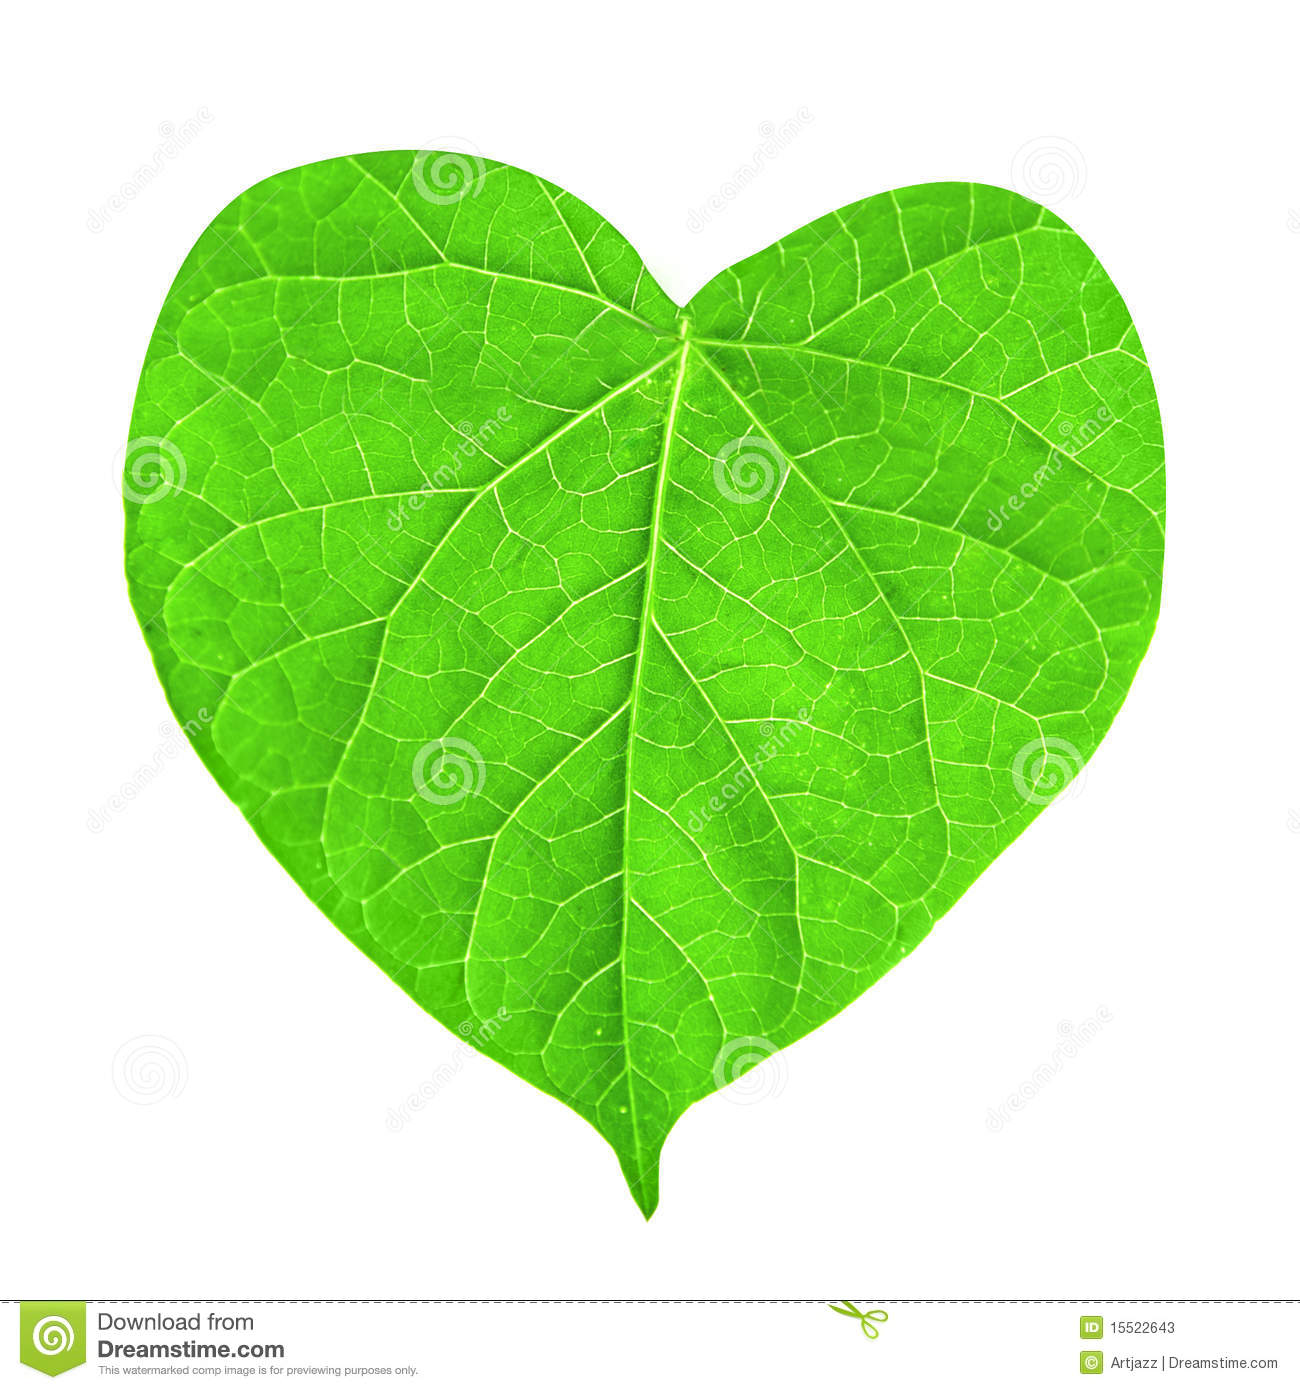 More Similar Stock Images Of   Green Leaf In Shape Of Heart